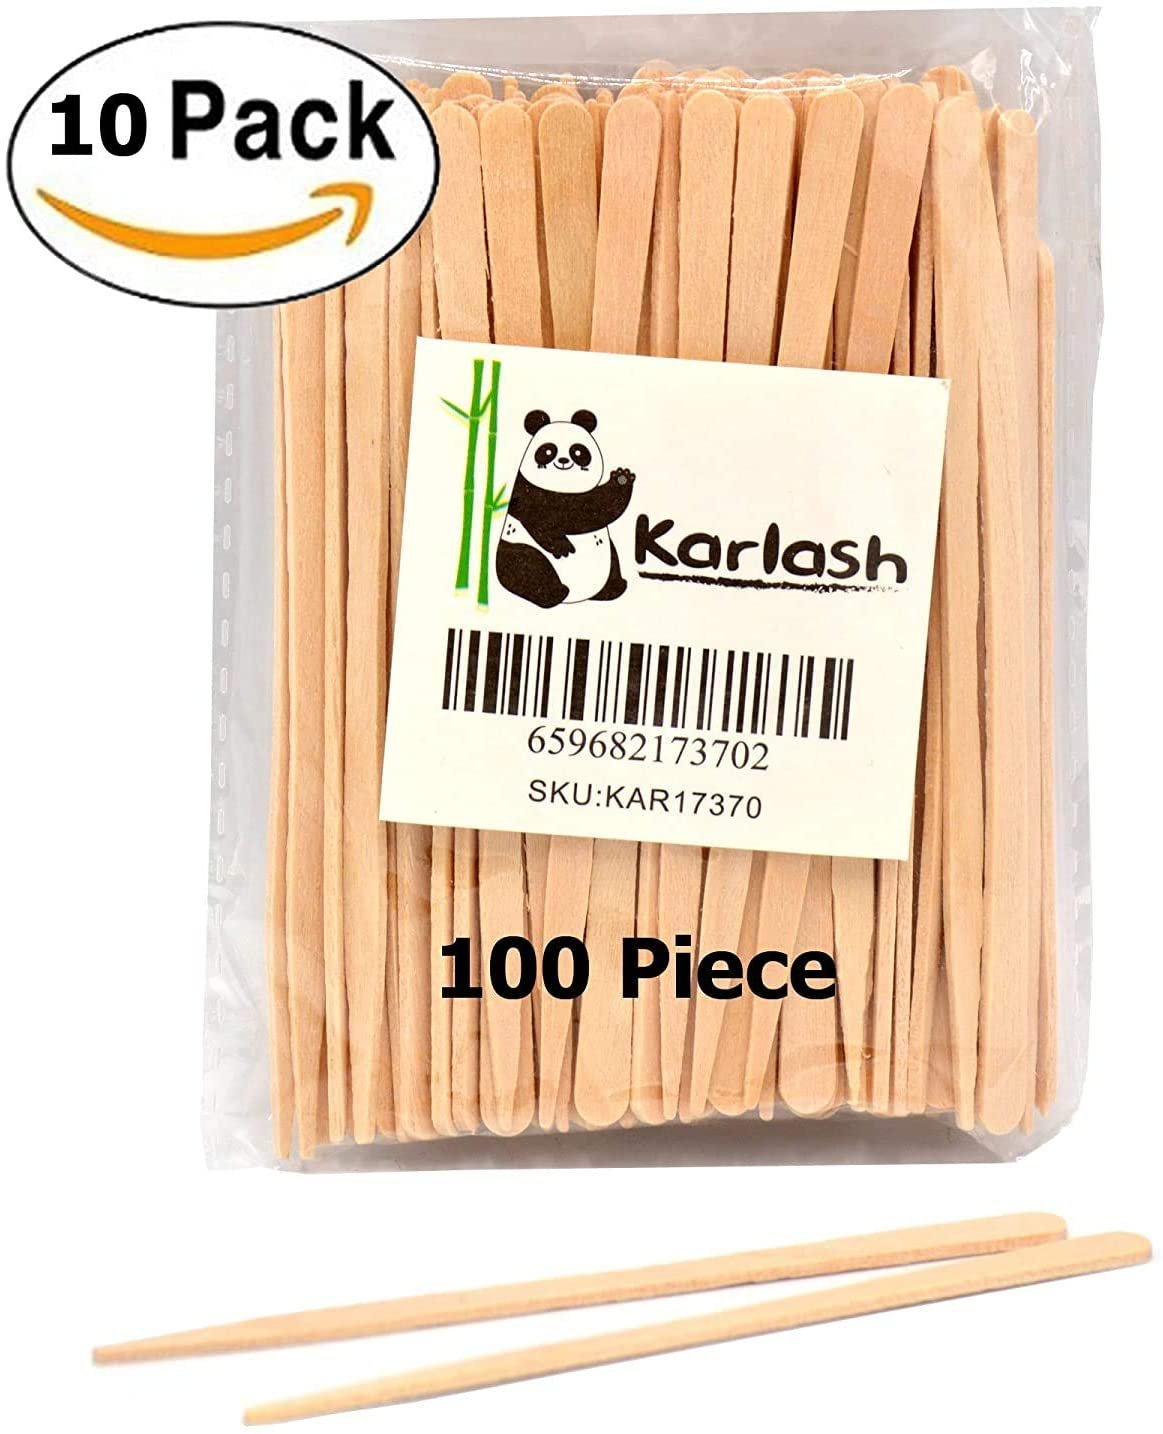 Karlash Small Wax Sticks Wood Spatulas Applicator Craft Sticks for Hair Eyebrow Removal (Pack of 1000)